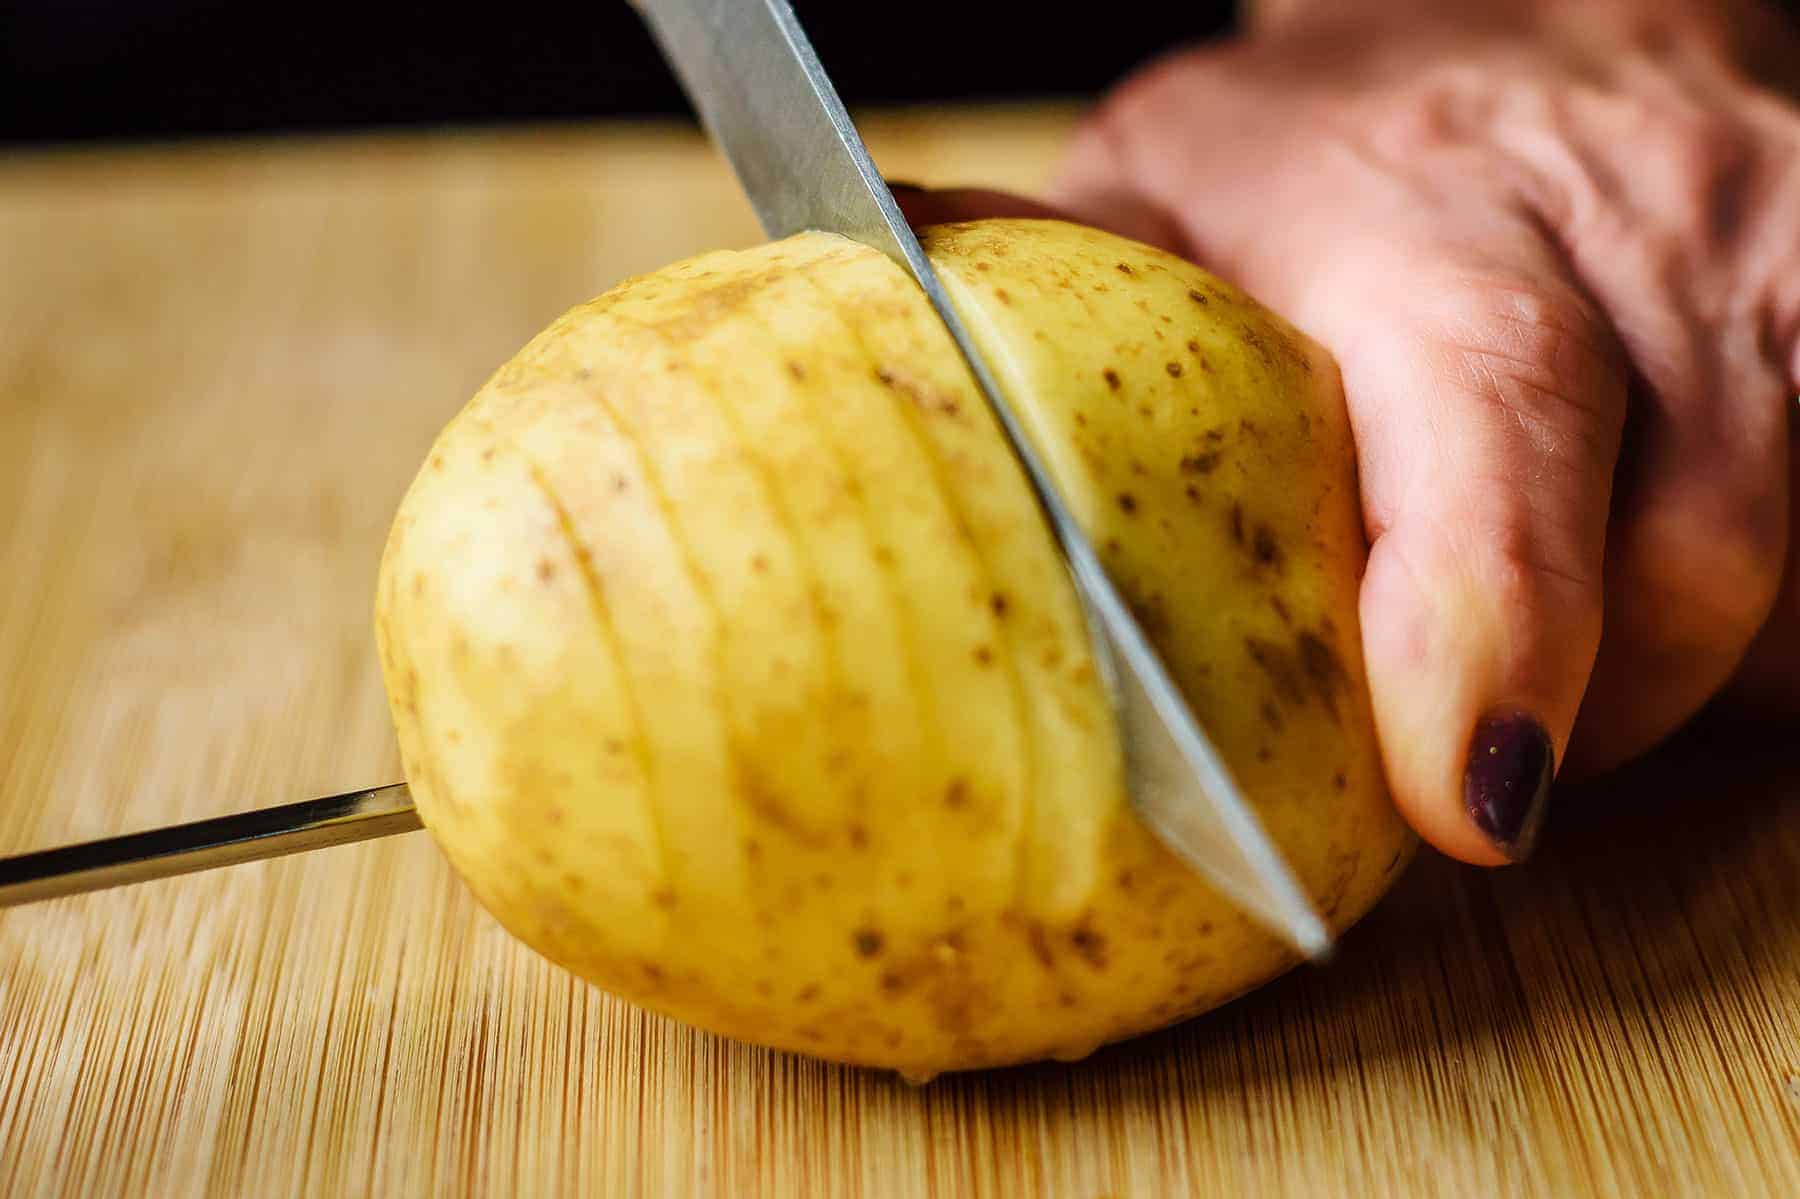 Continue slicing through potato stopping at skewer